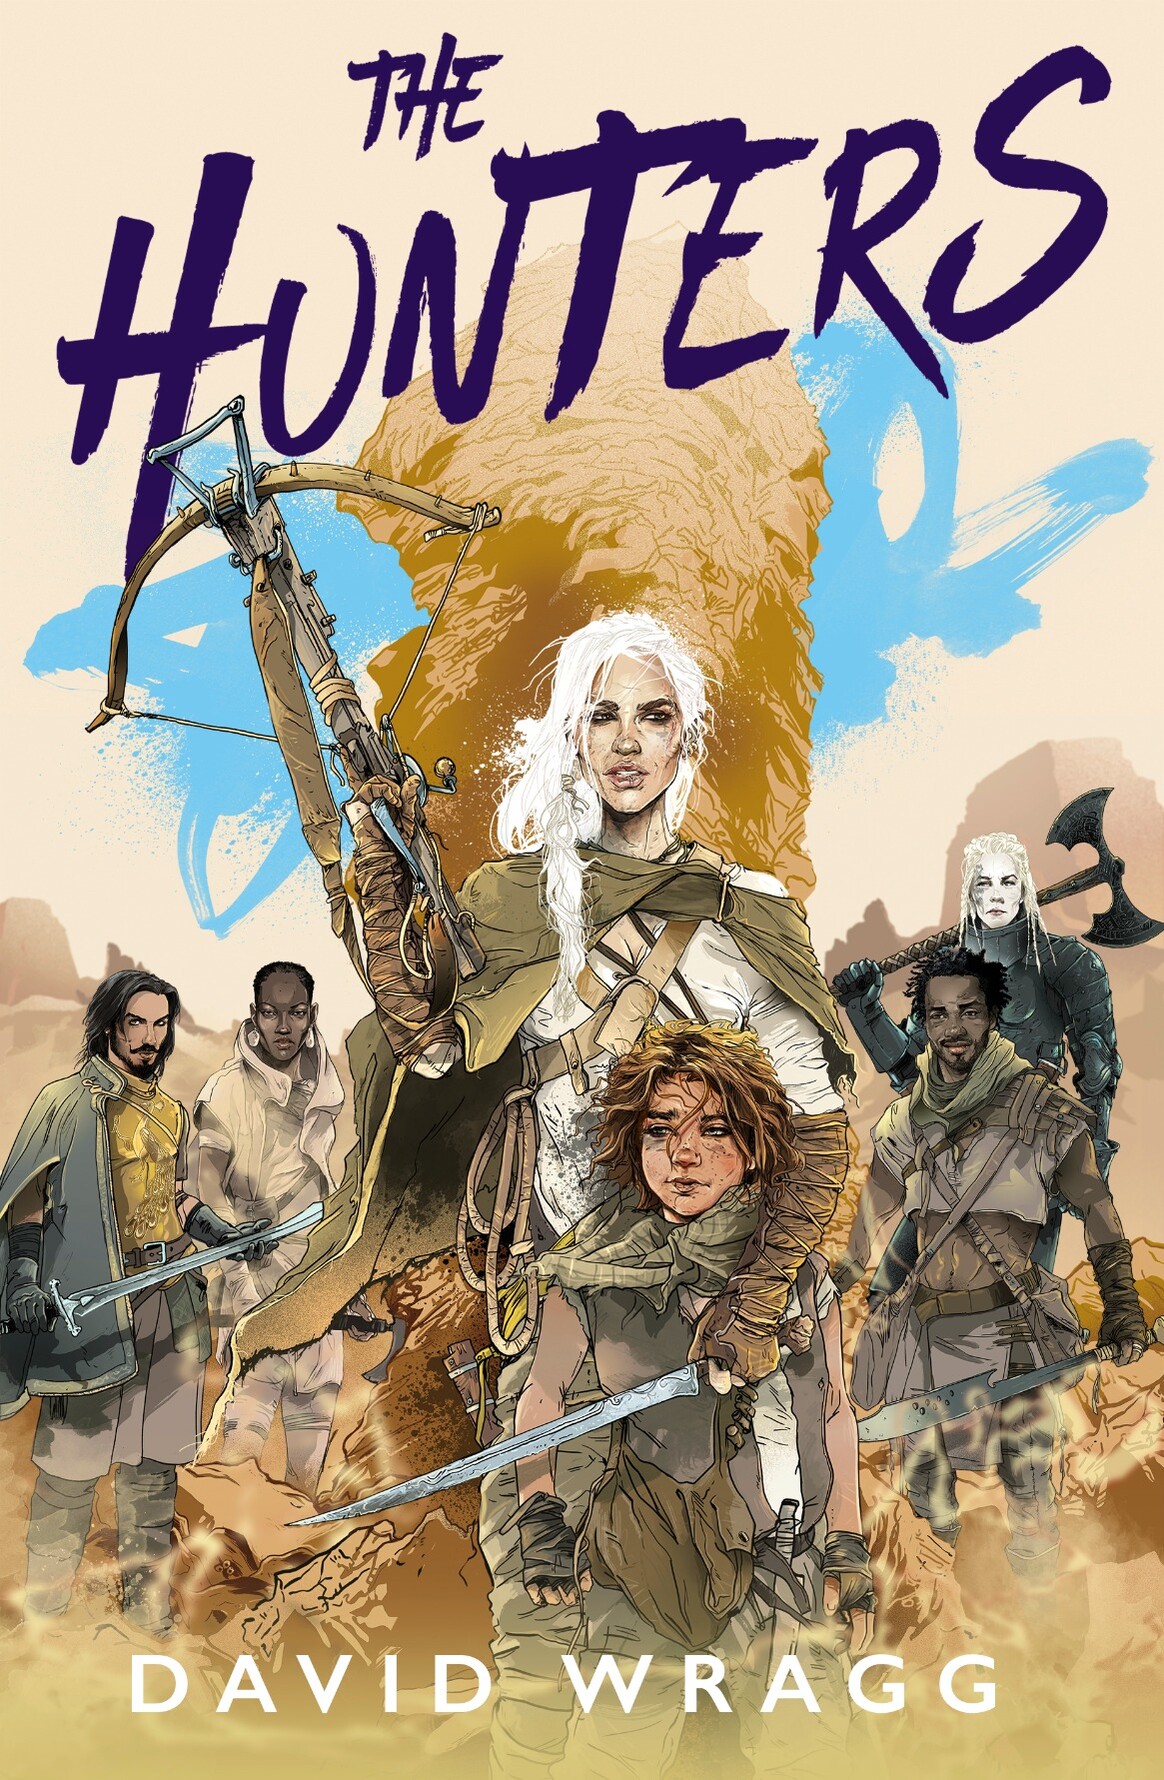 The magnificent cover for THE HUNTERS